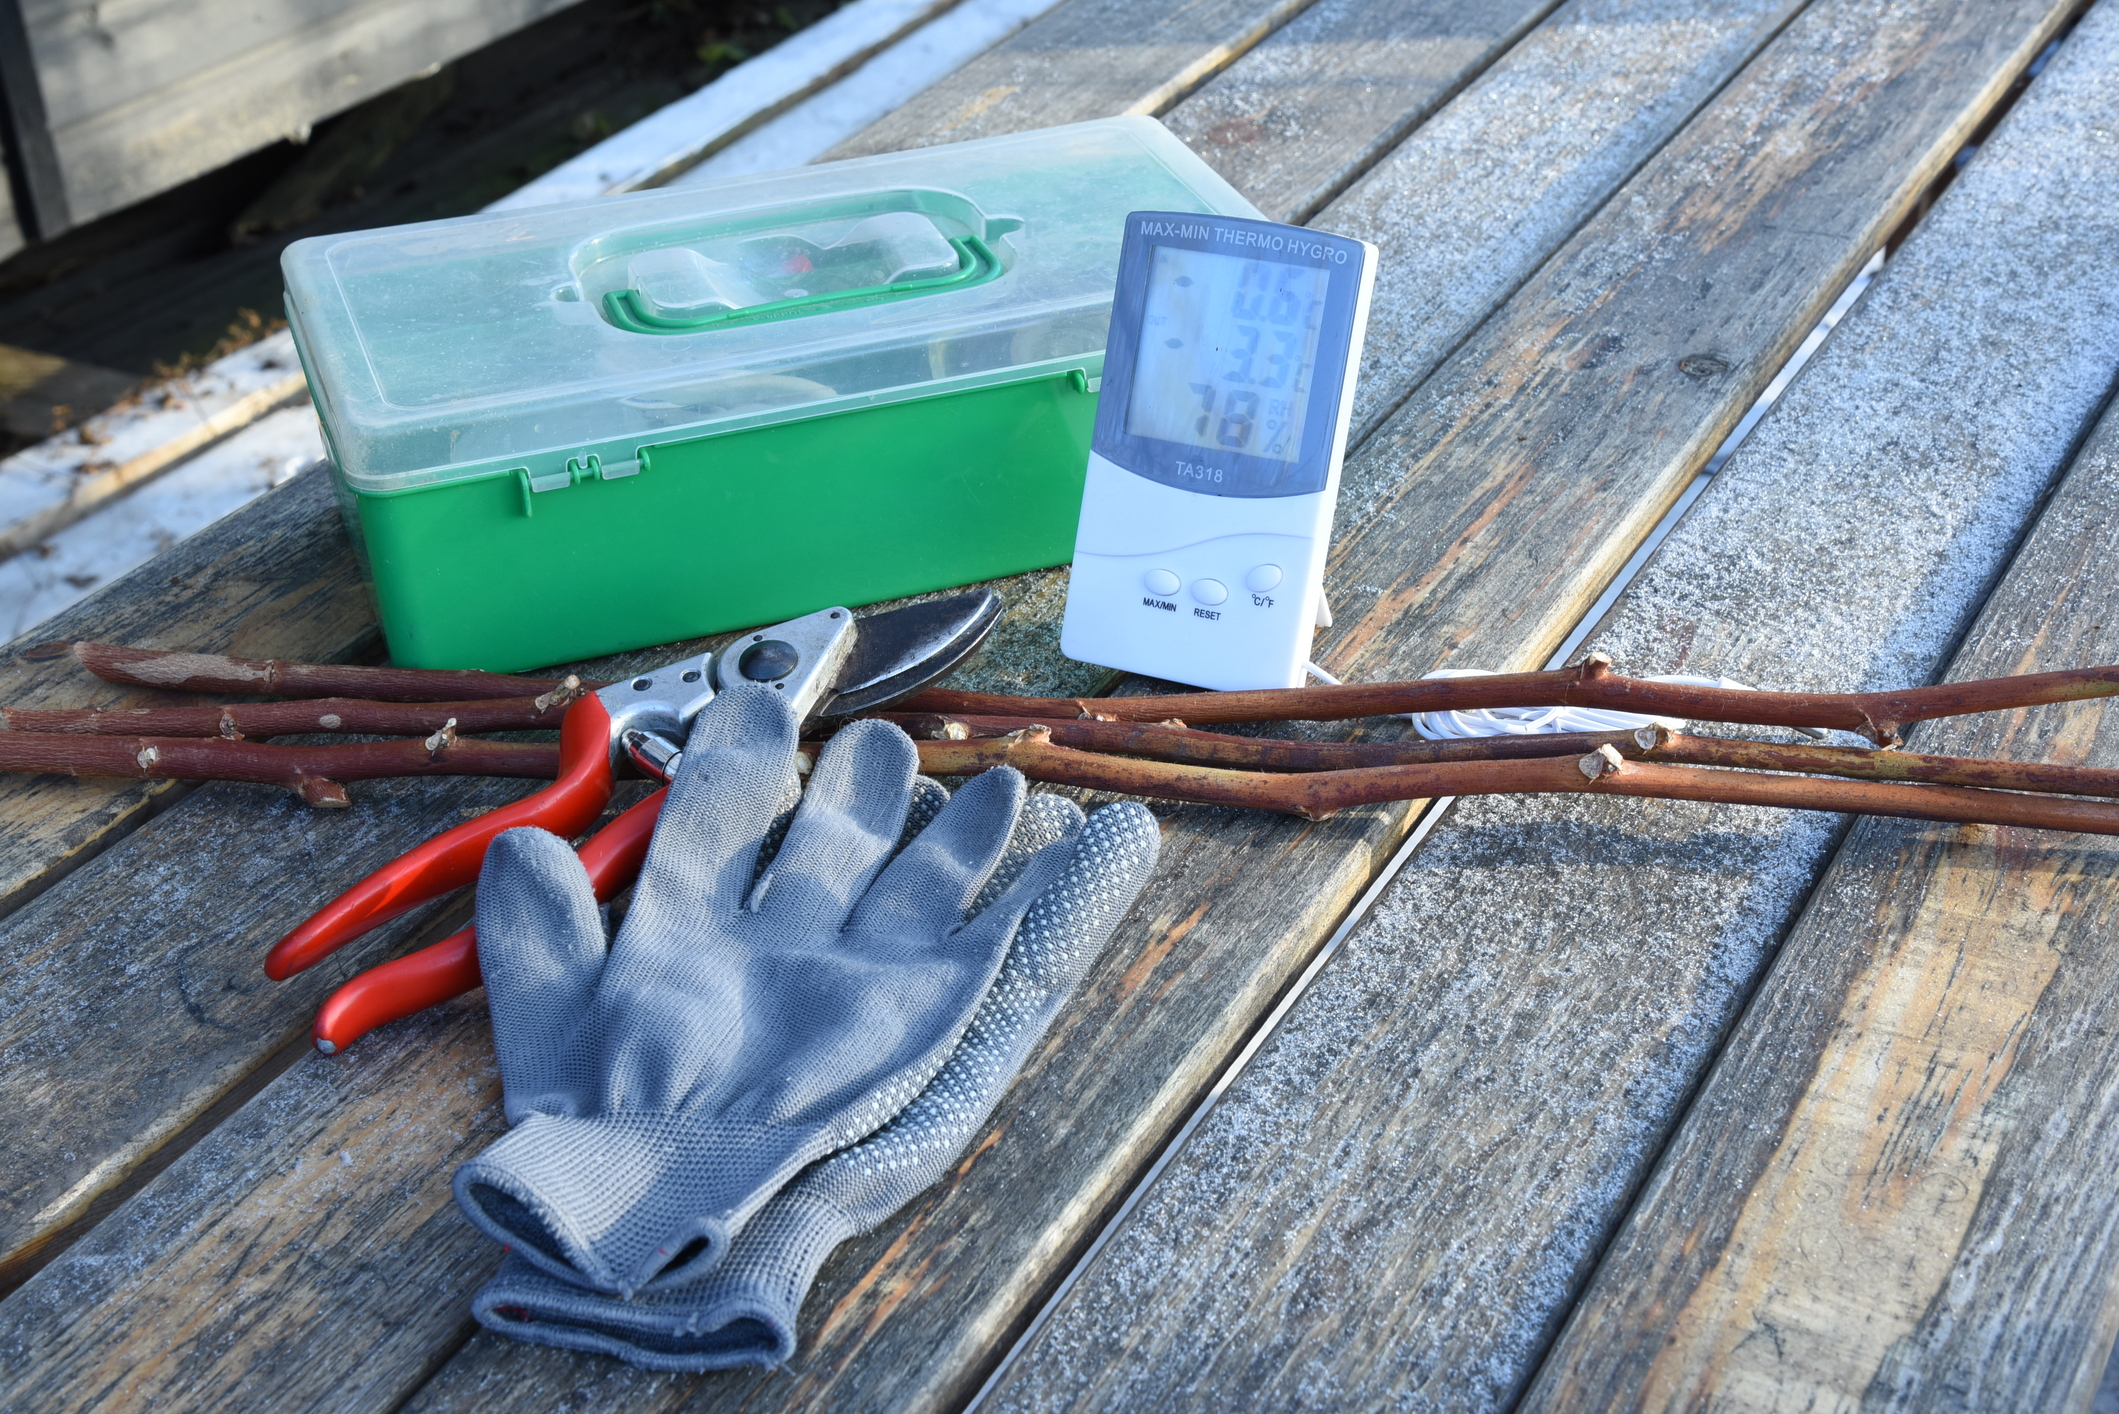 Red pruner on wooden frozen table with pruning tree or bush branches and gloves and garden exterior digital thermometer.